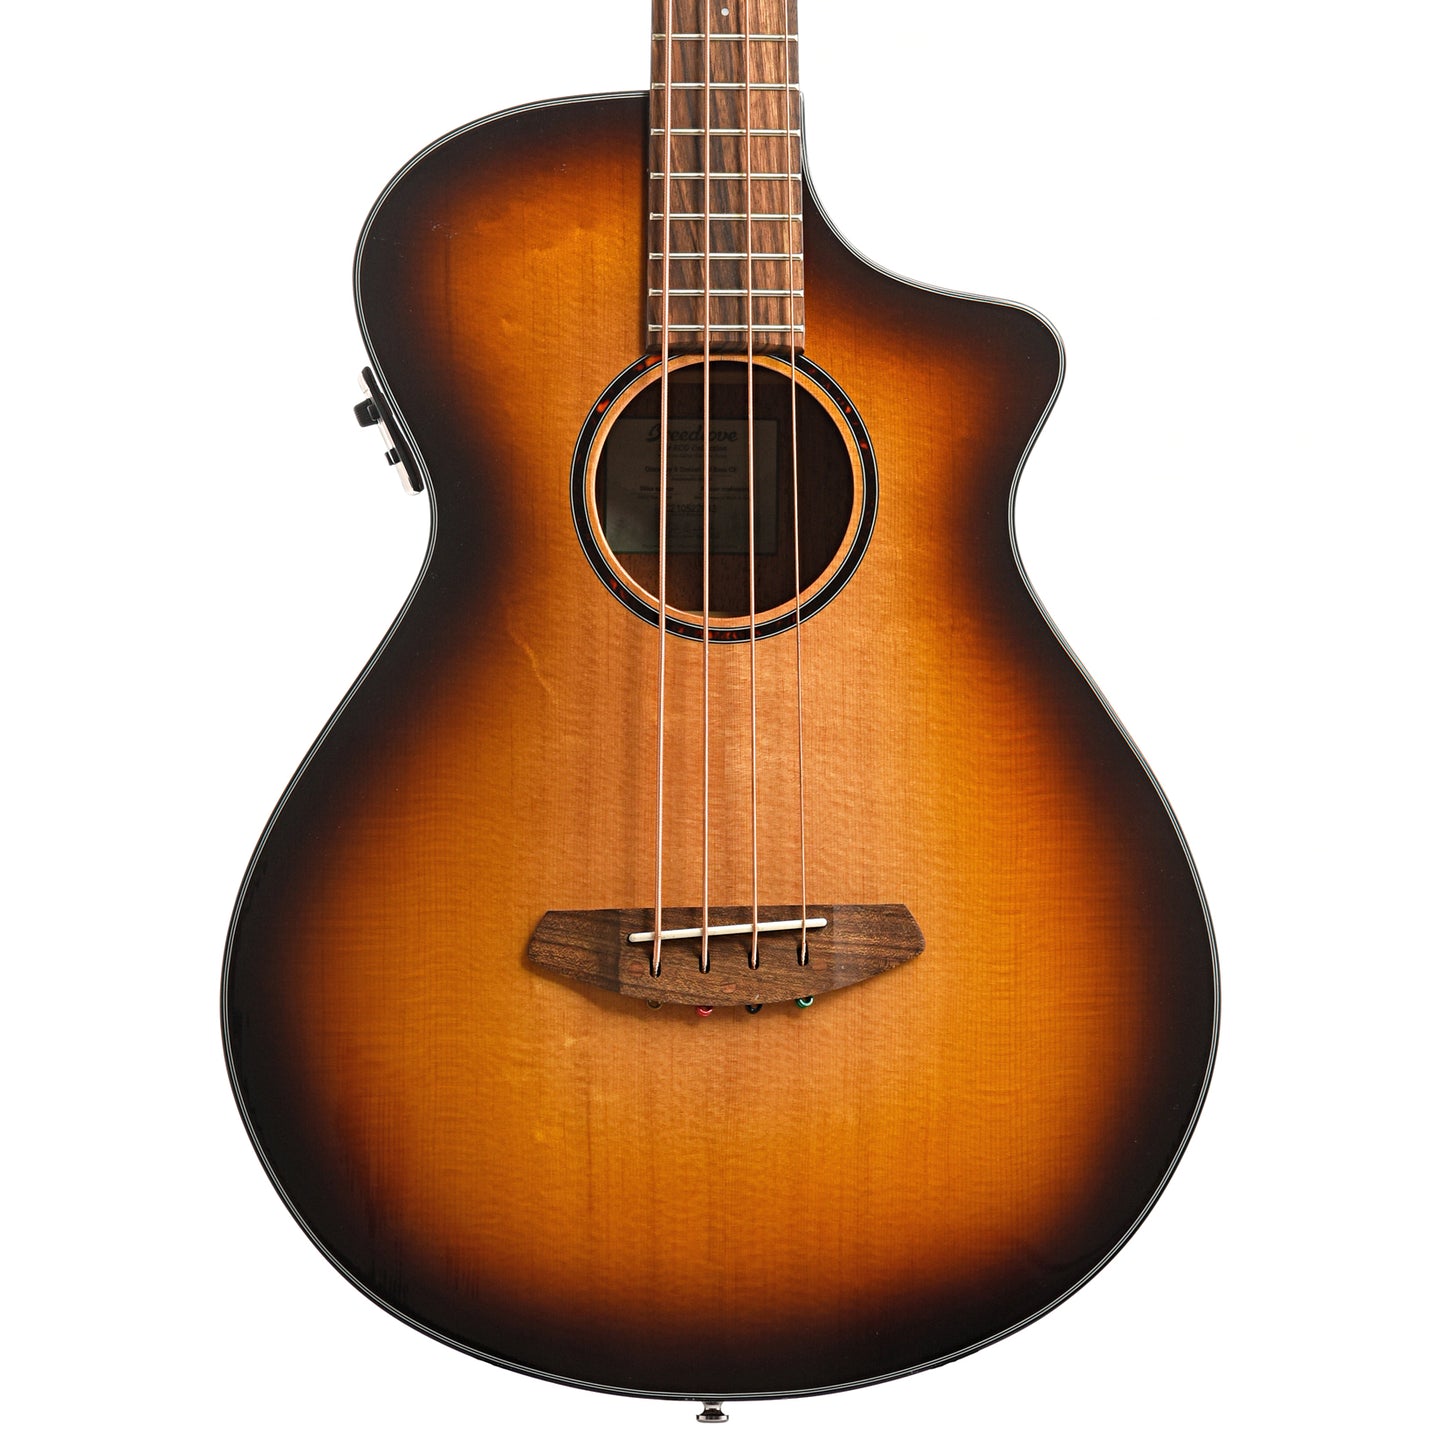 Image 1 of Breedlove Eco Collection Discovery S Concert Edgeburst Bass CE Sitka-African Mahogany Acoustic-Electric Bass Guitar- SKU# DSCN44BCESSAM : Product Type Acoustic Bass Guitars : Elderly Instruments